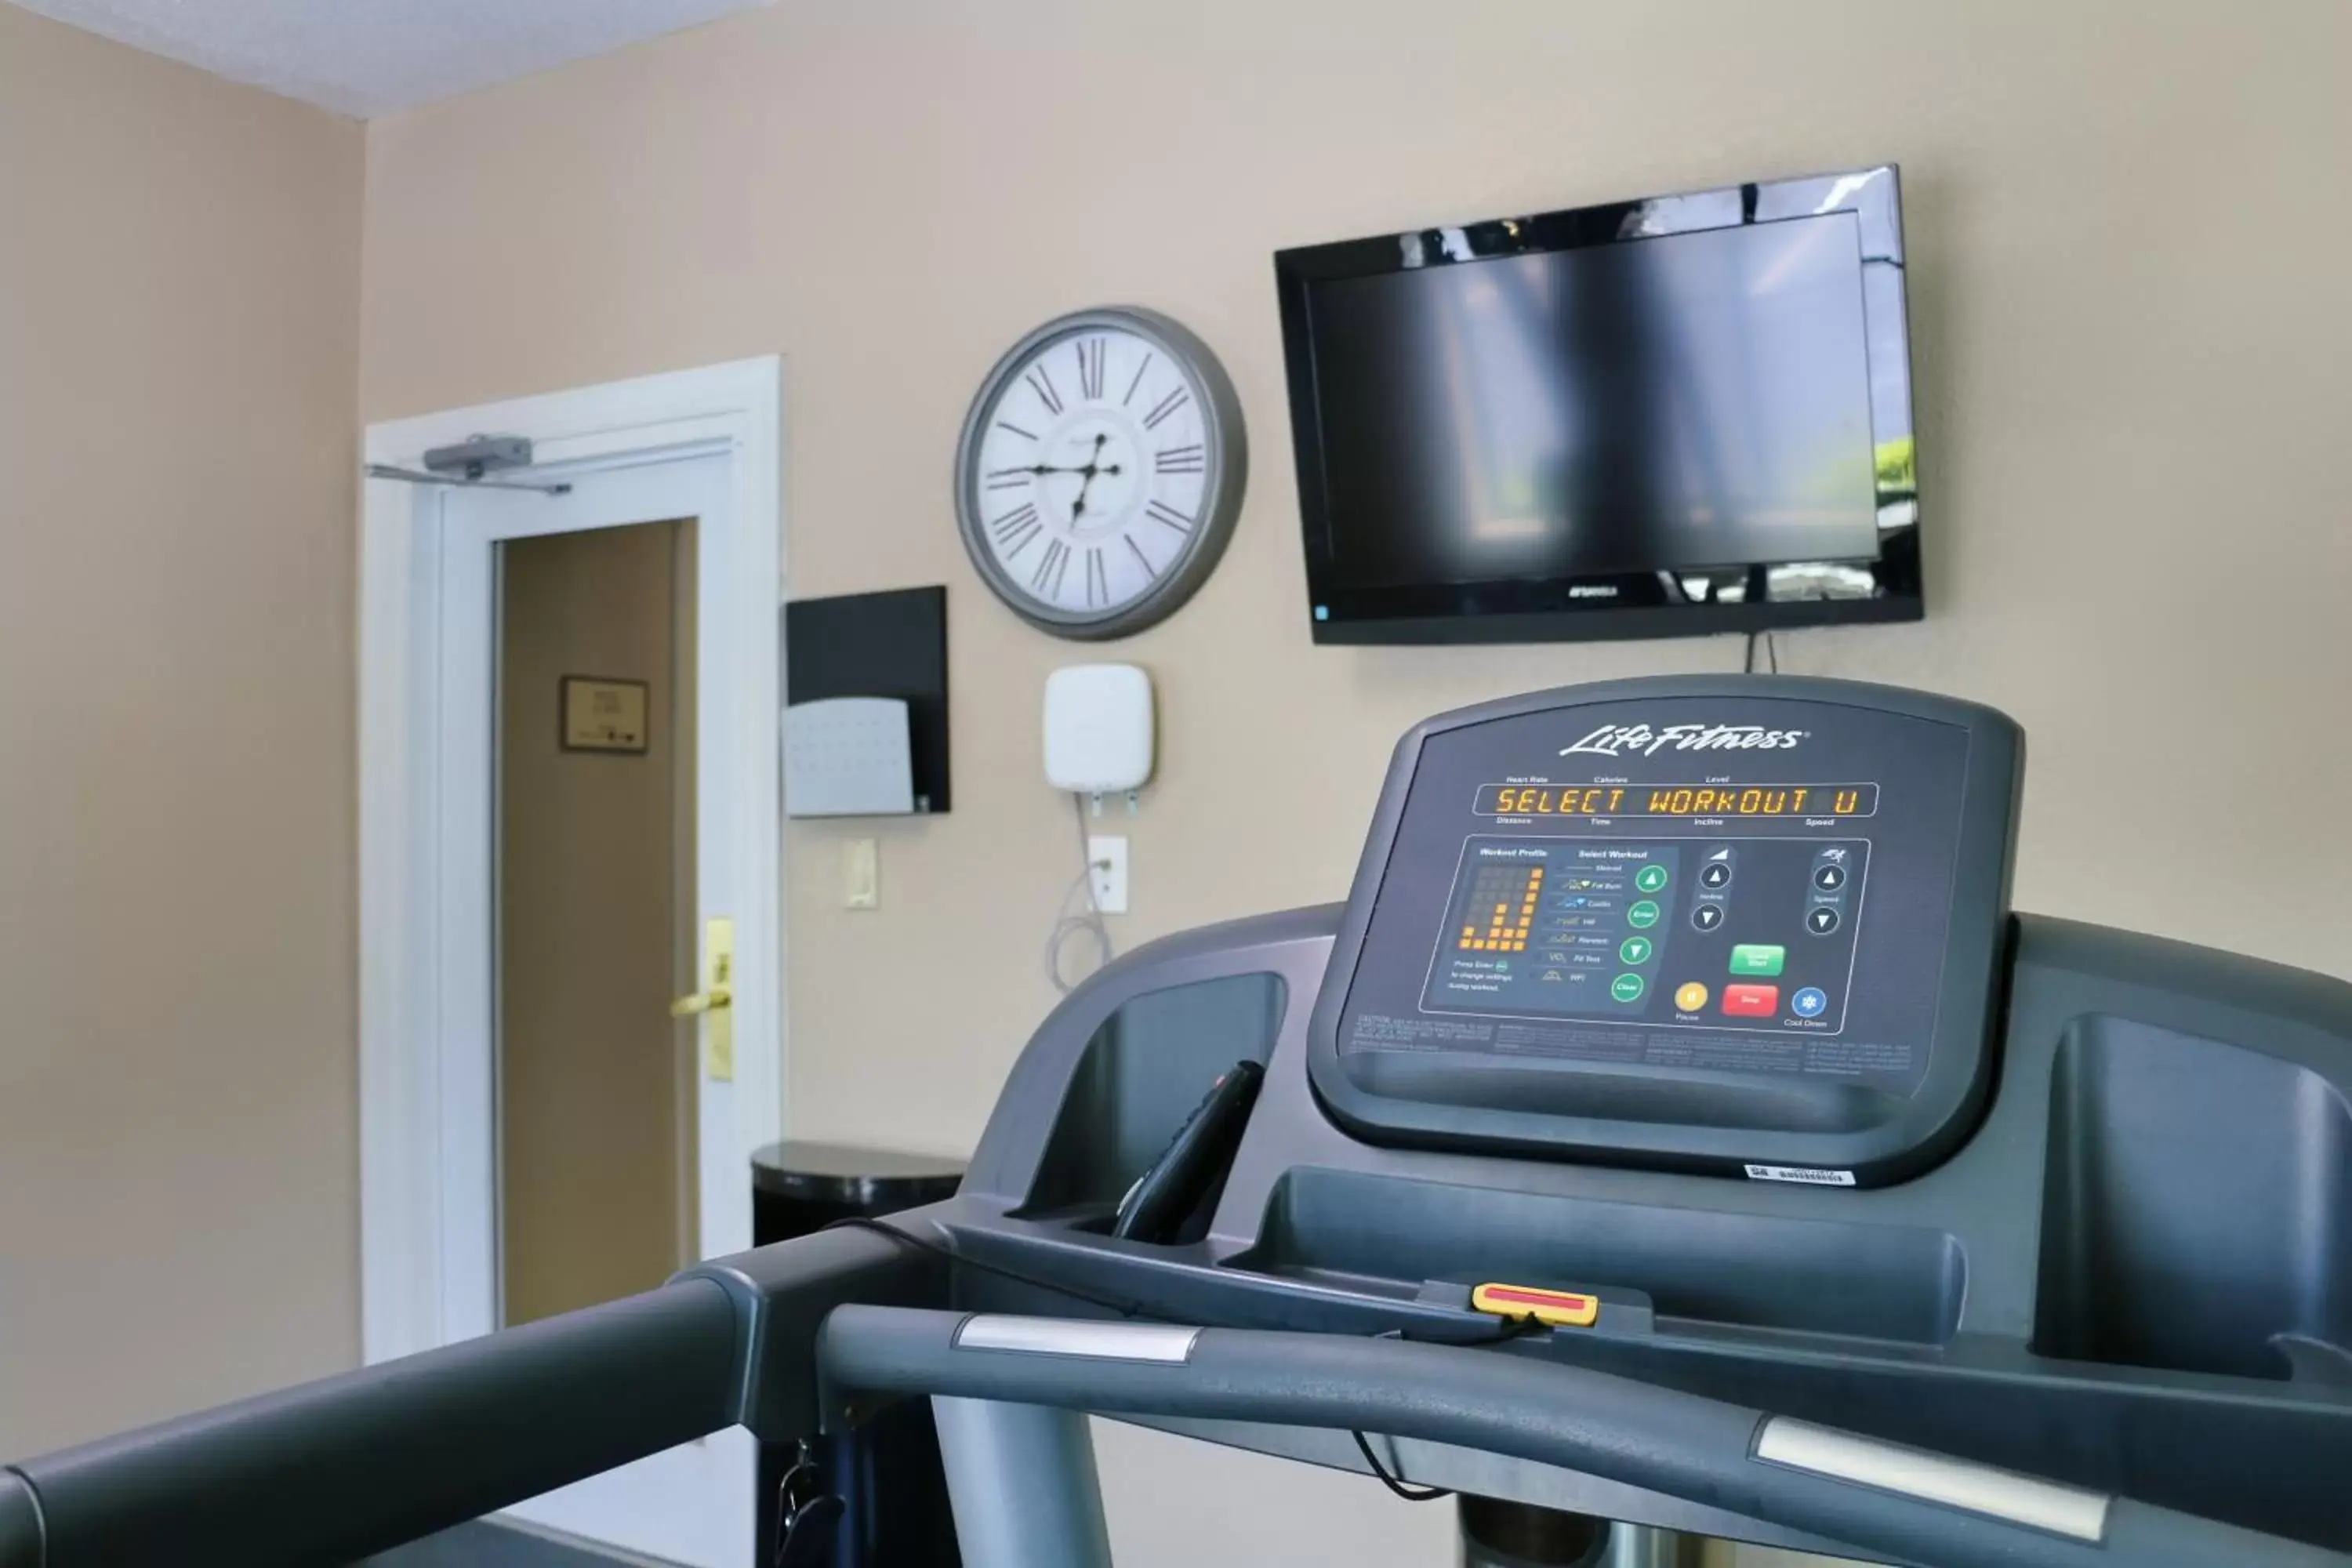 Fitness centre/facilities, Fitness Center/Facilities in Country Inn & Suites by Radisson, Savannah Gateway, GA